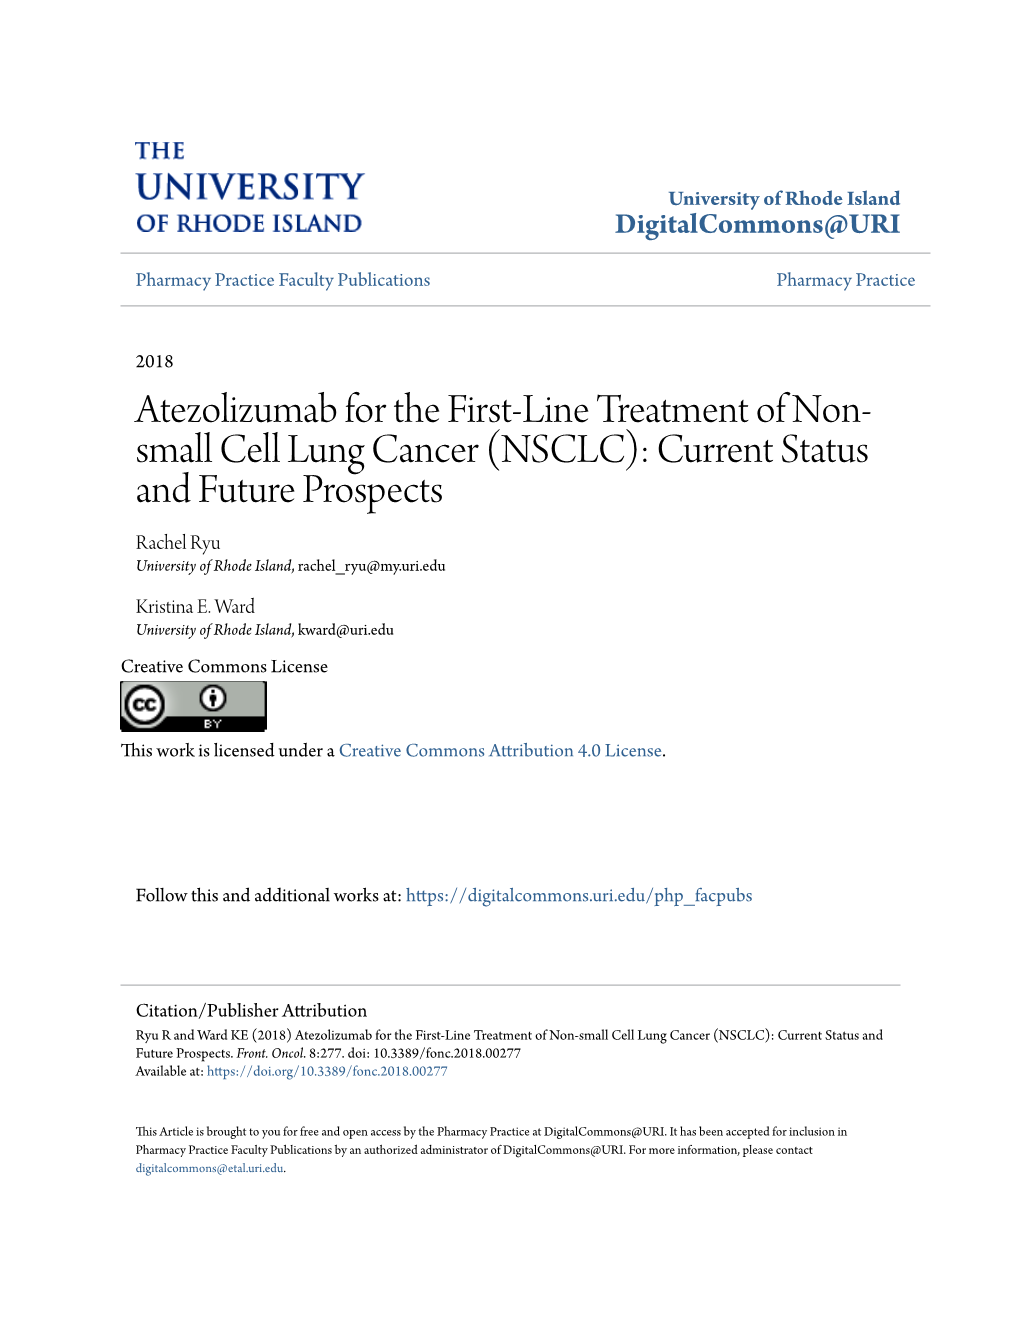 Atezolizumab for the First-Line Treatment of Non-Small Cell Lung Cancer (NSCLC): Current Status and Future Prospects